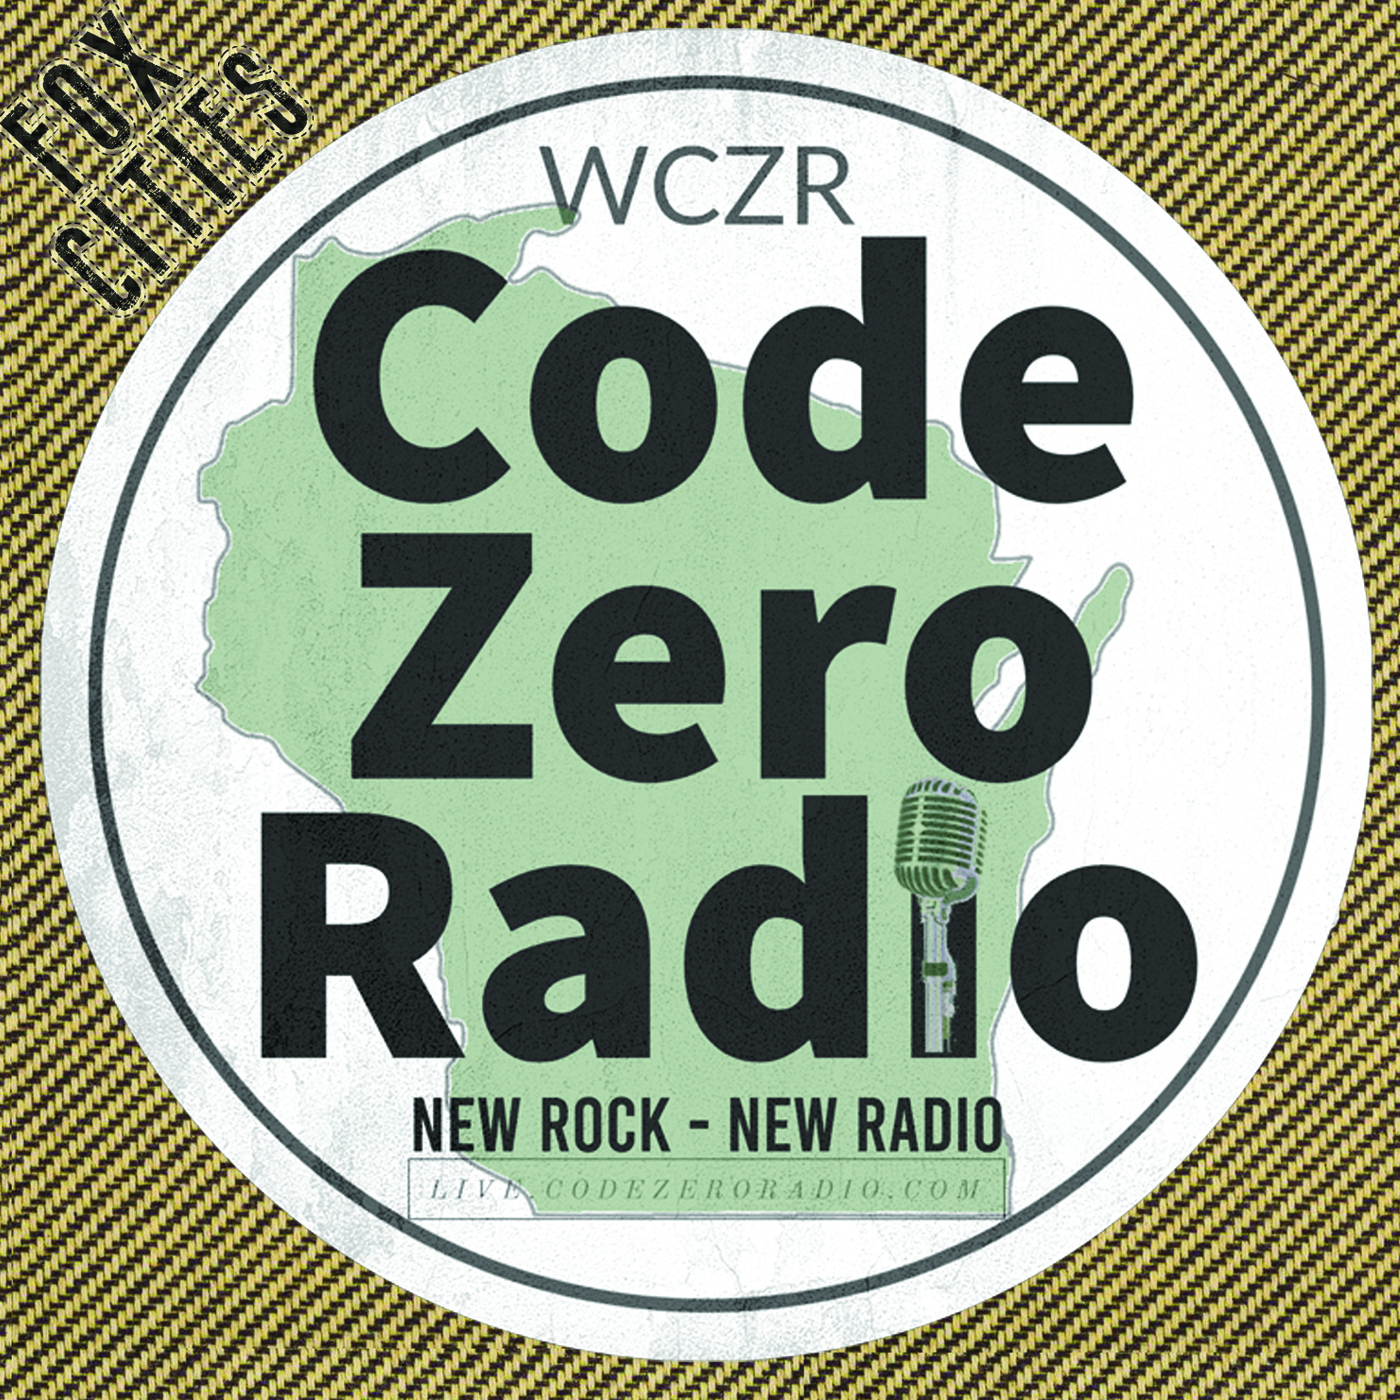 Art for WCZR by Broadcasting Out of Appleton